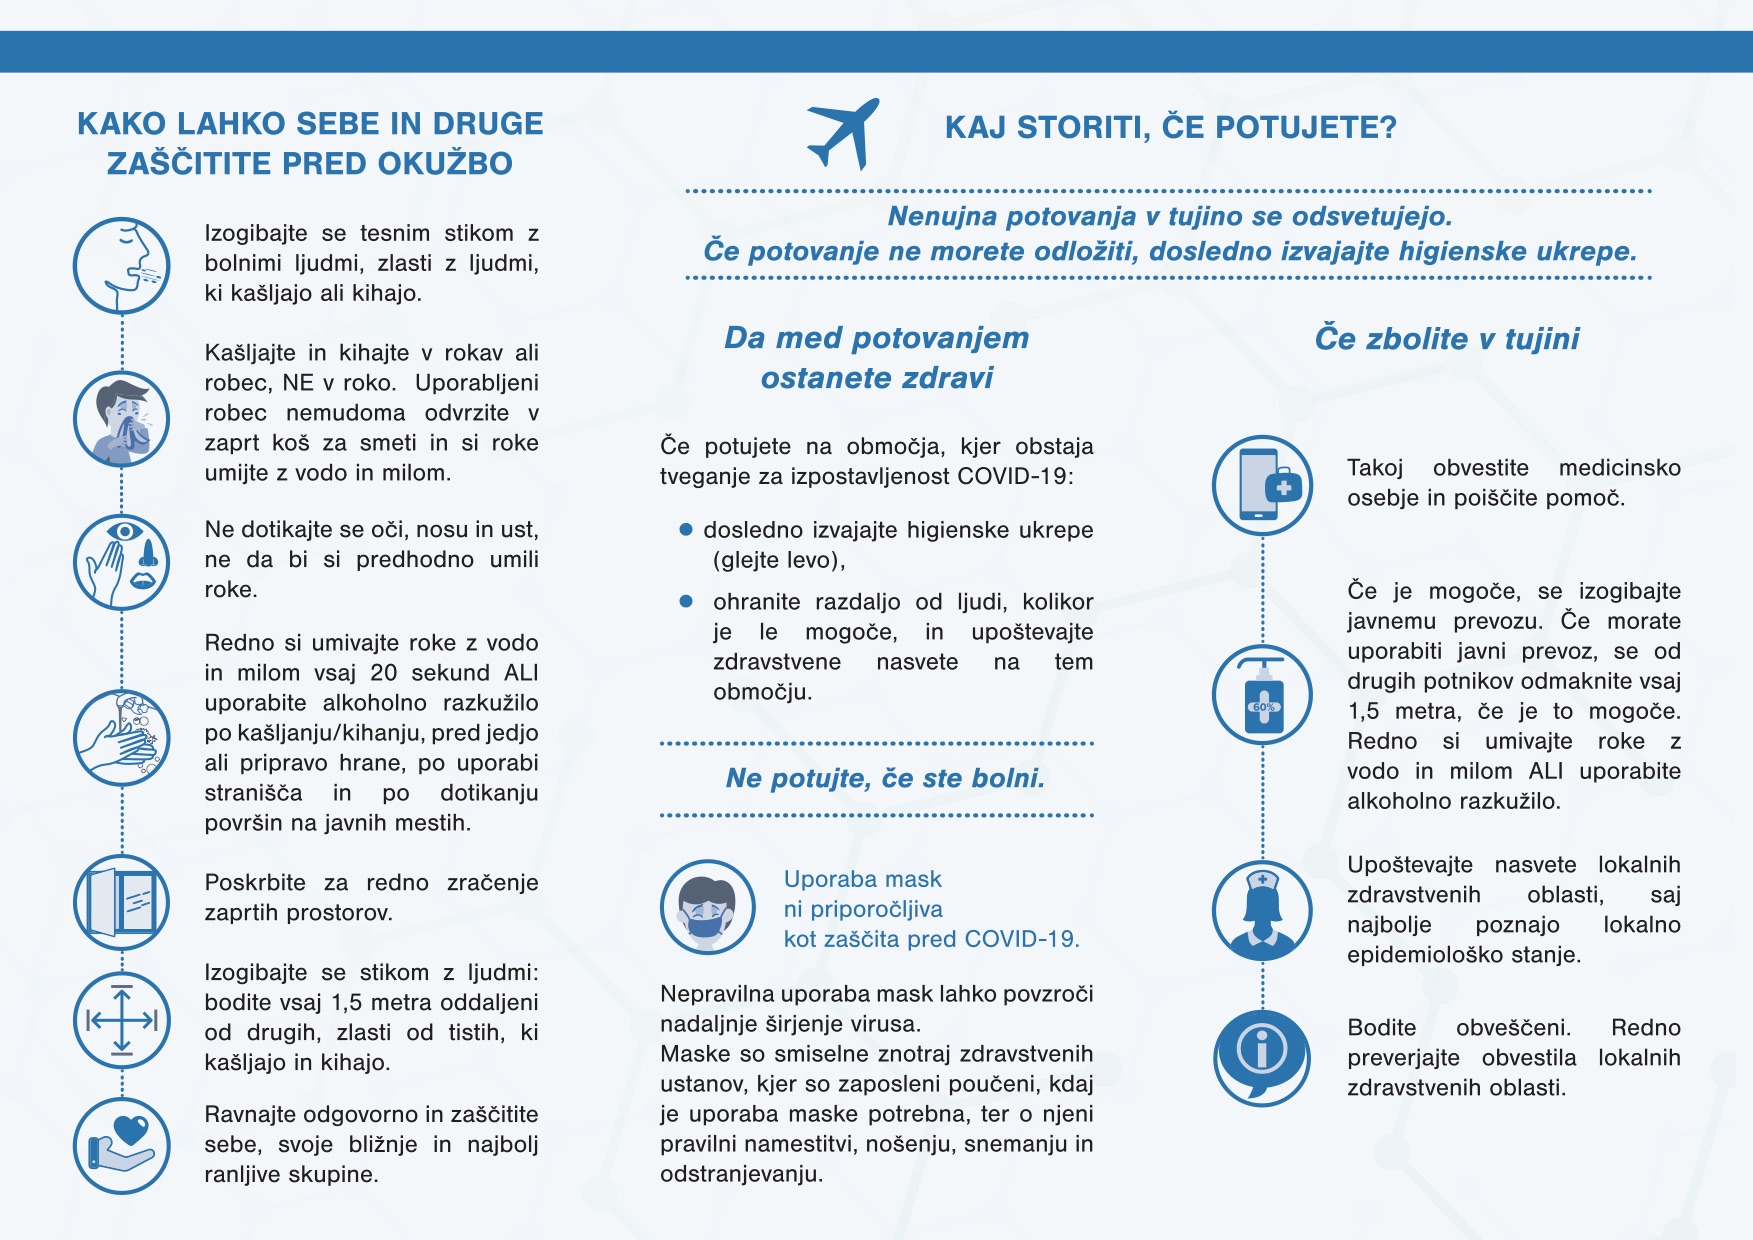 The brochure about the COVID-19 emergency (in Slovenian, but there is also an Italian version) received in the mail by all Slovenian citizens. This document is clear and essential, and it is also free to download from Slovenia's institutional websites. This is a great example of public information on health matters provided during a serious crisis.